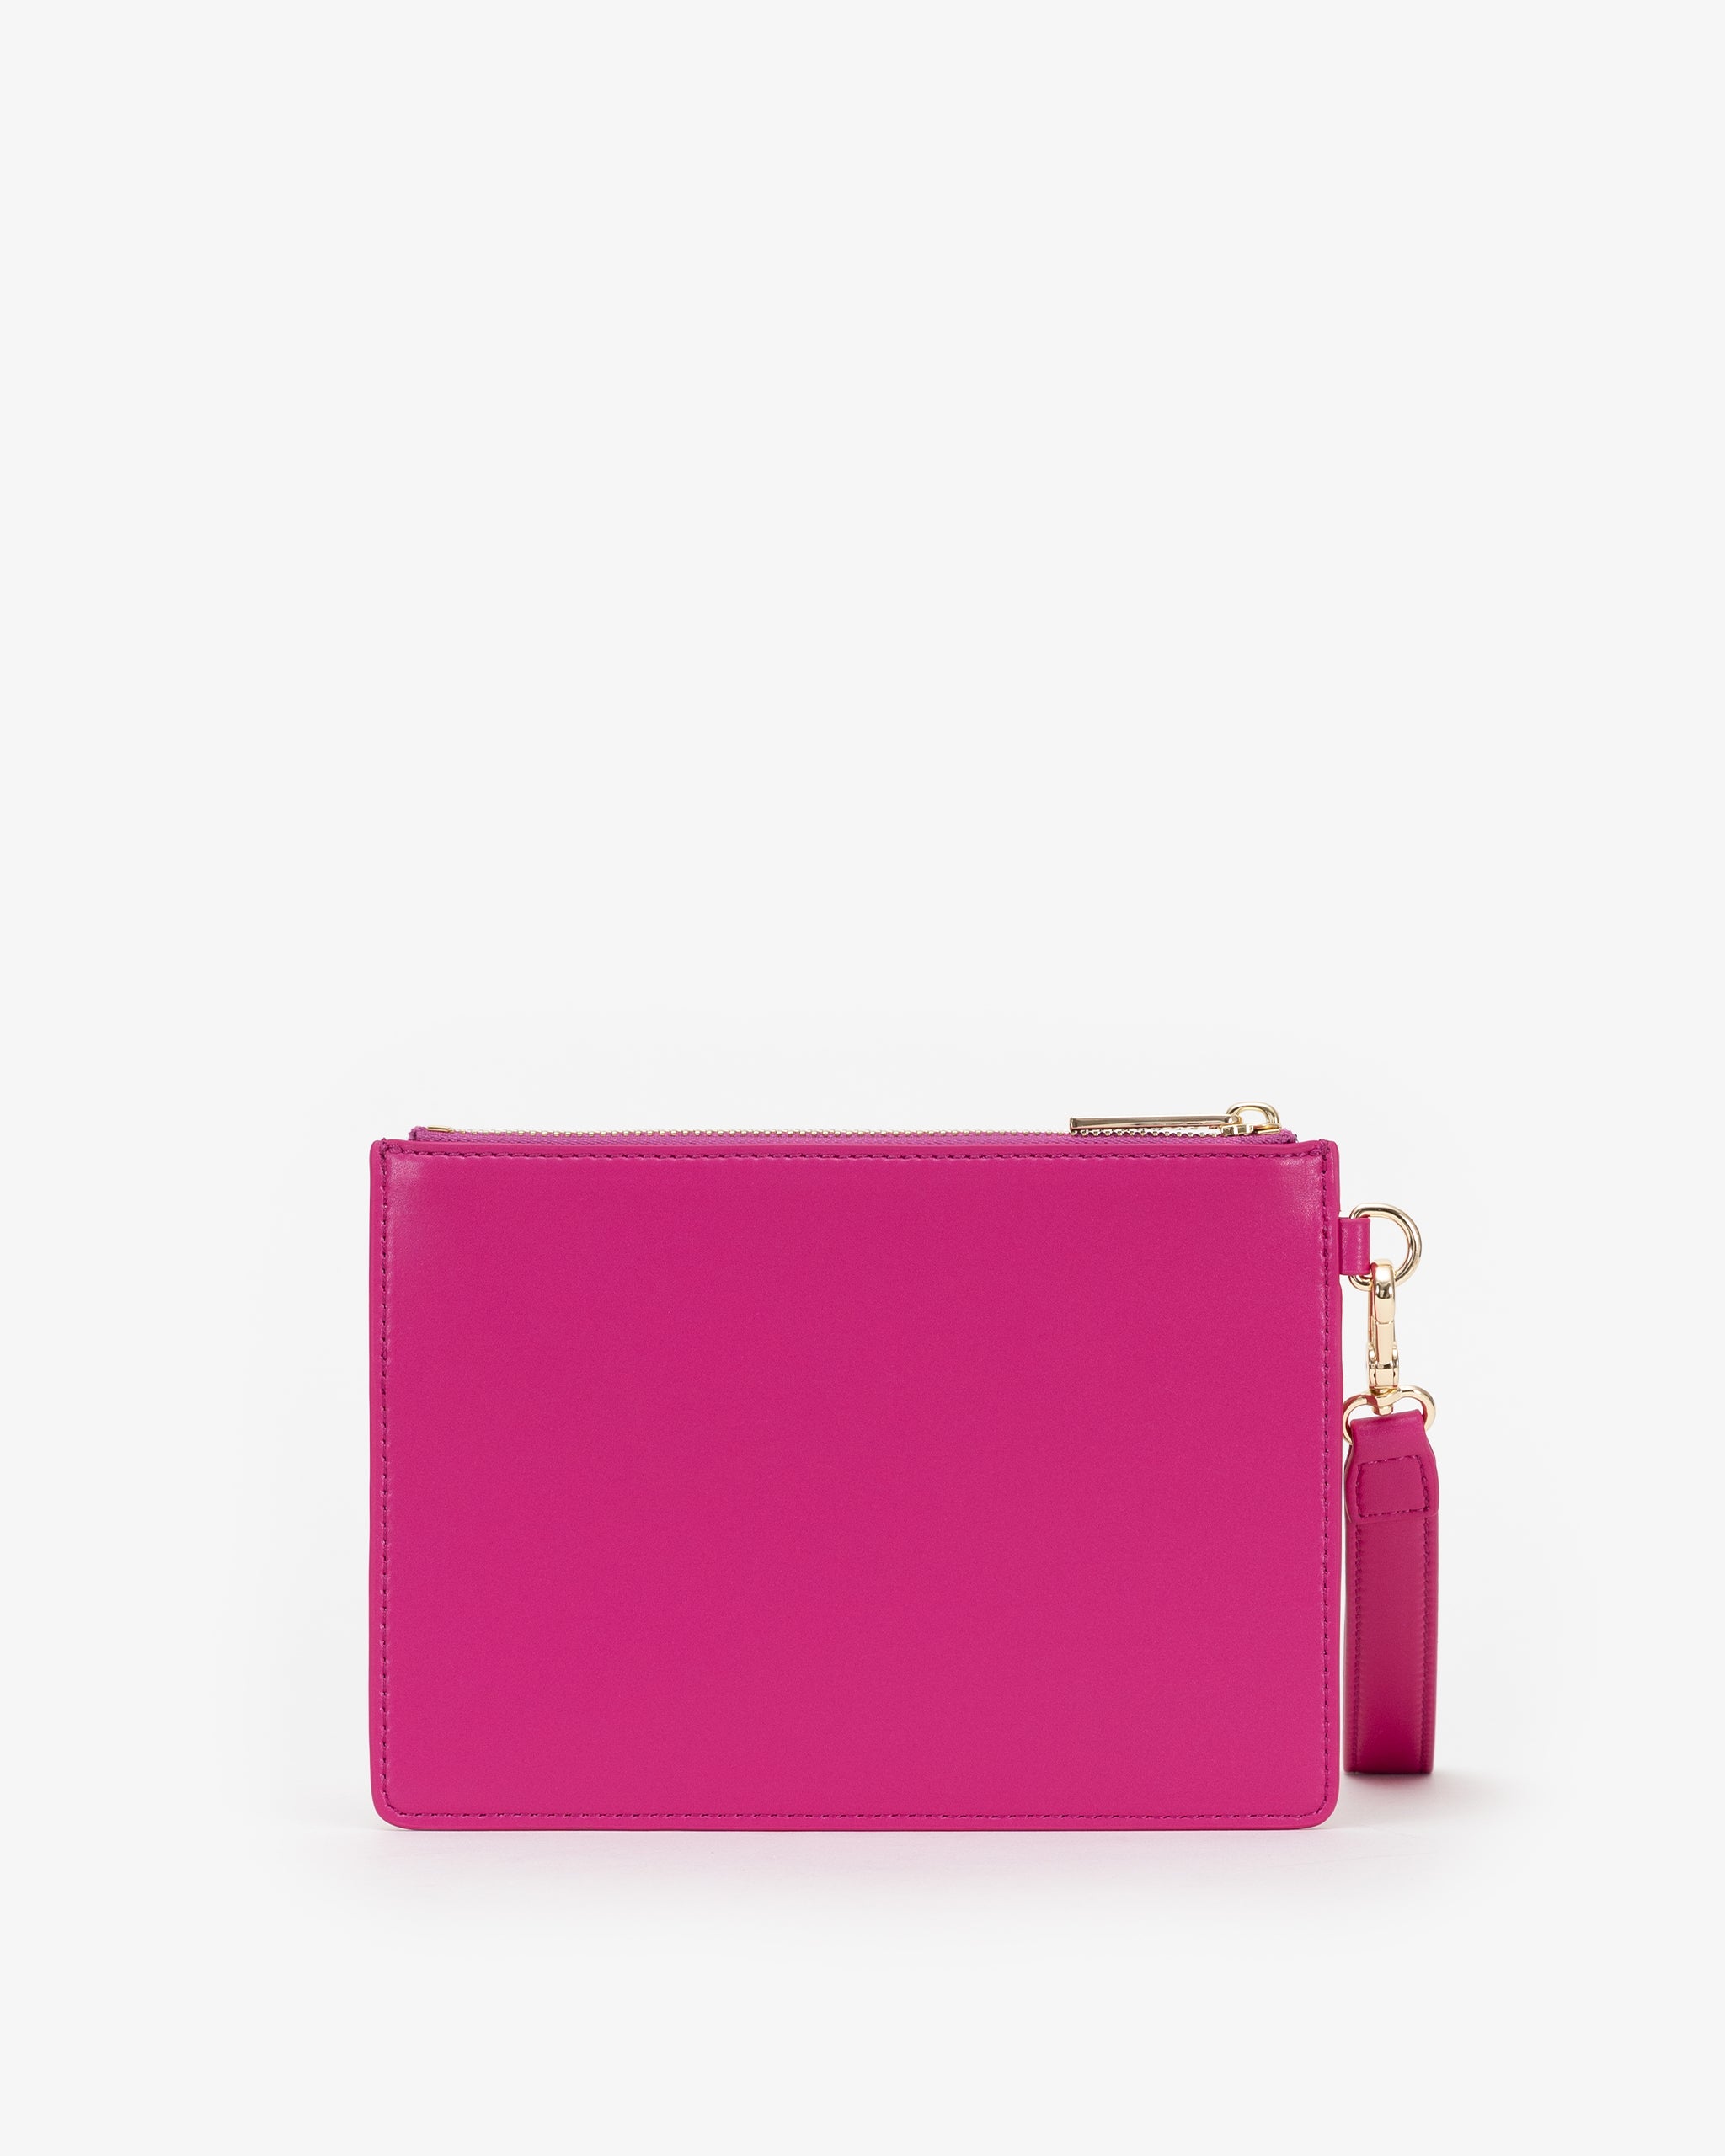 Pre-order (Mid-May): Classic Pouch in Fuchsia with Personalised Hardware